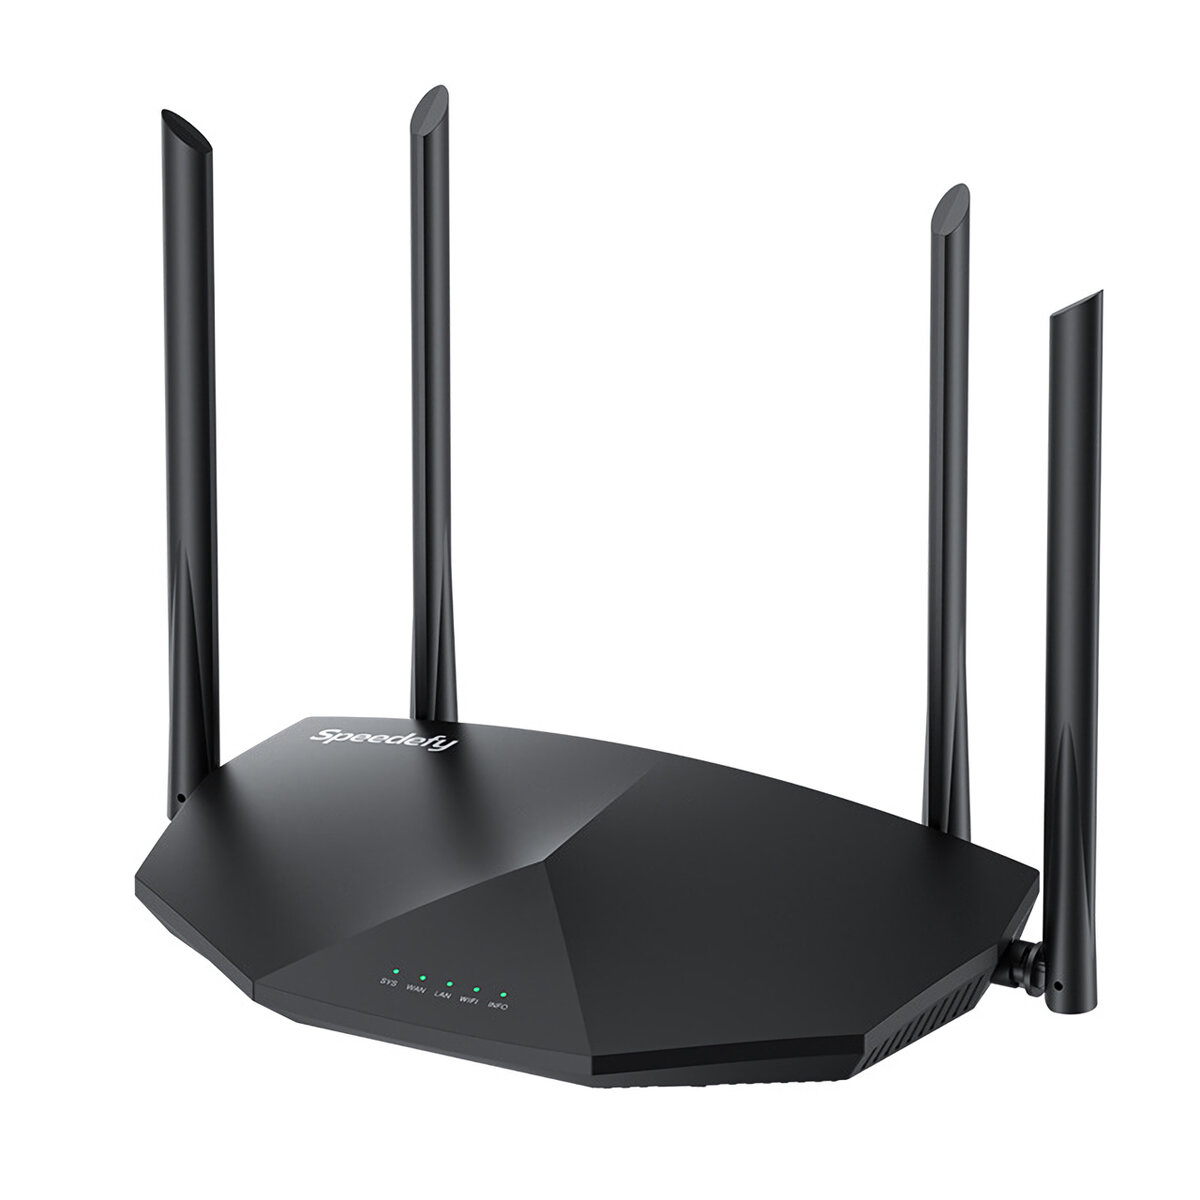 Speedefy AC2100 Dual Band High Speed Wireless WiFi Router 2.4GHz&5GHz Up to 35 Devices 2000 sq.ft Co